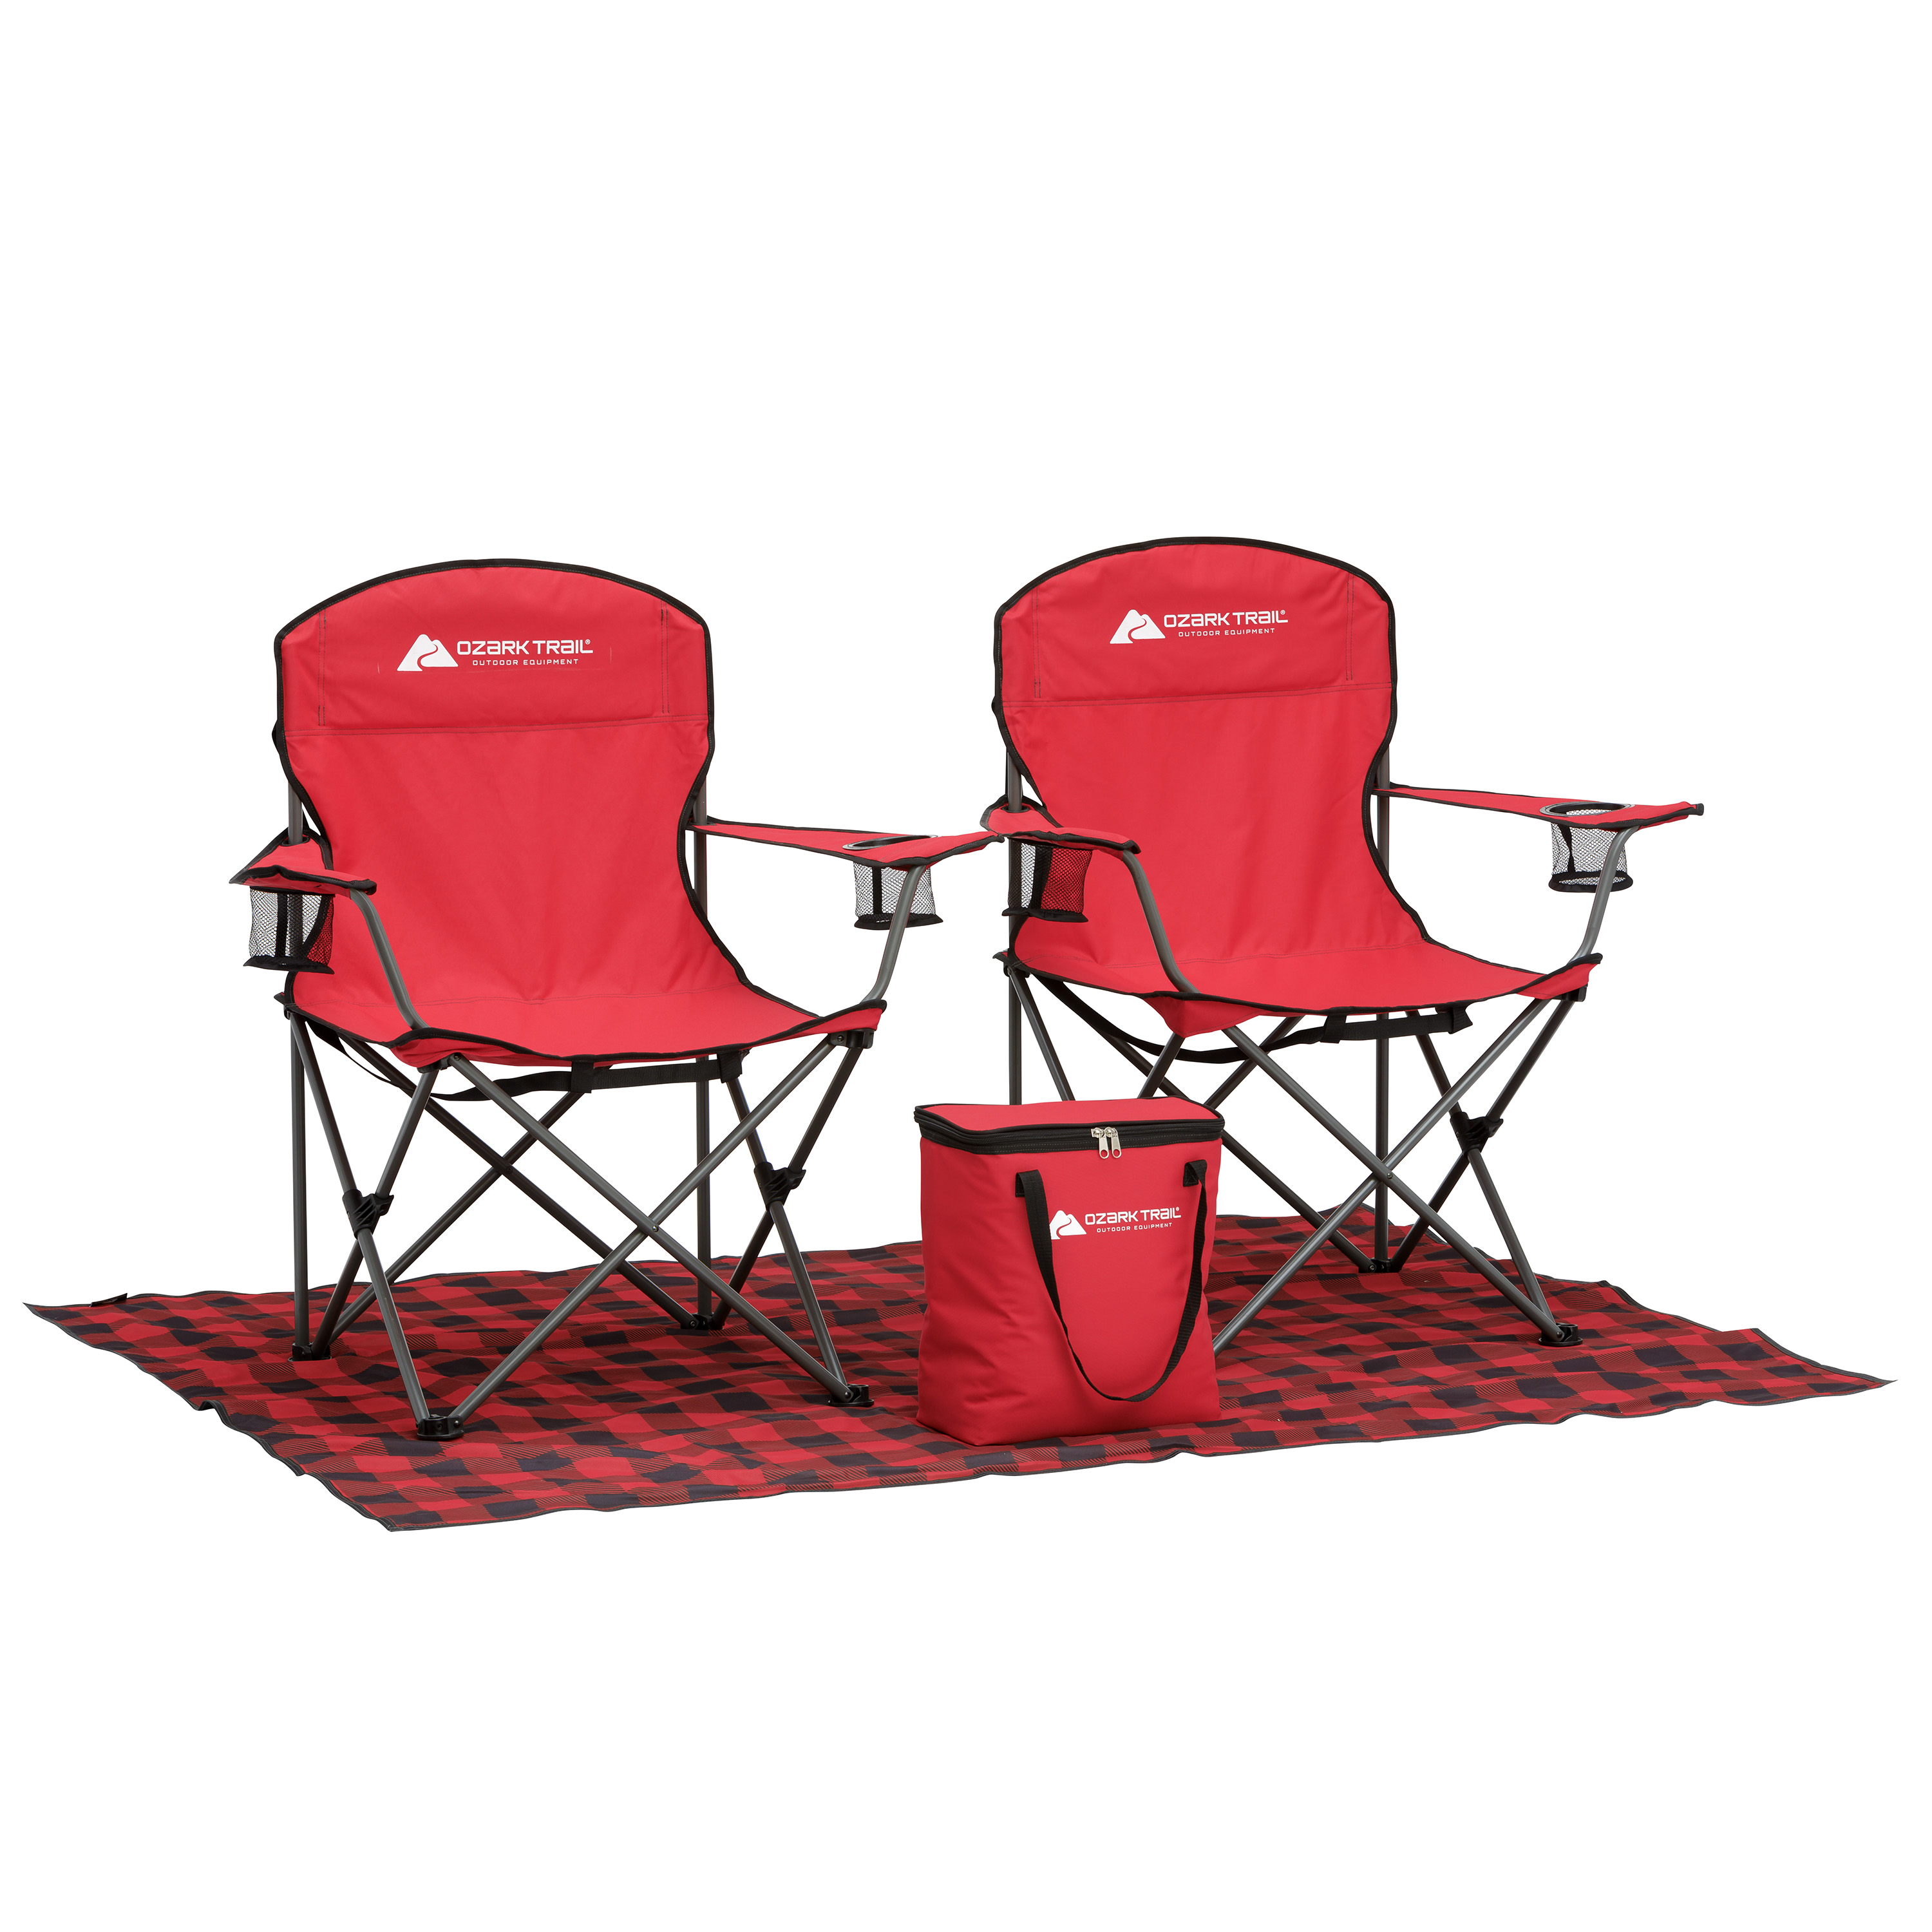 Ozark Trail Mini Tailgate Combo with Footprint, Cooler, and Chairs - image 1 of 5